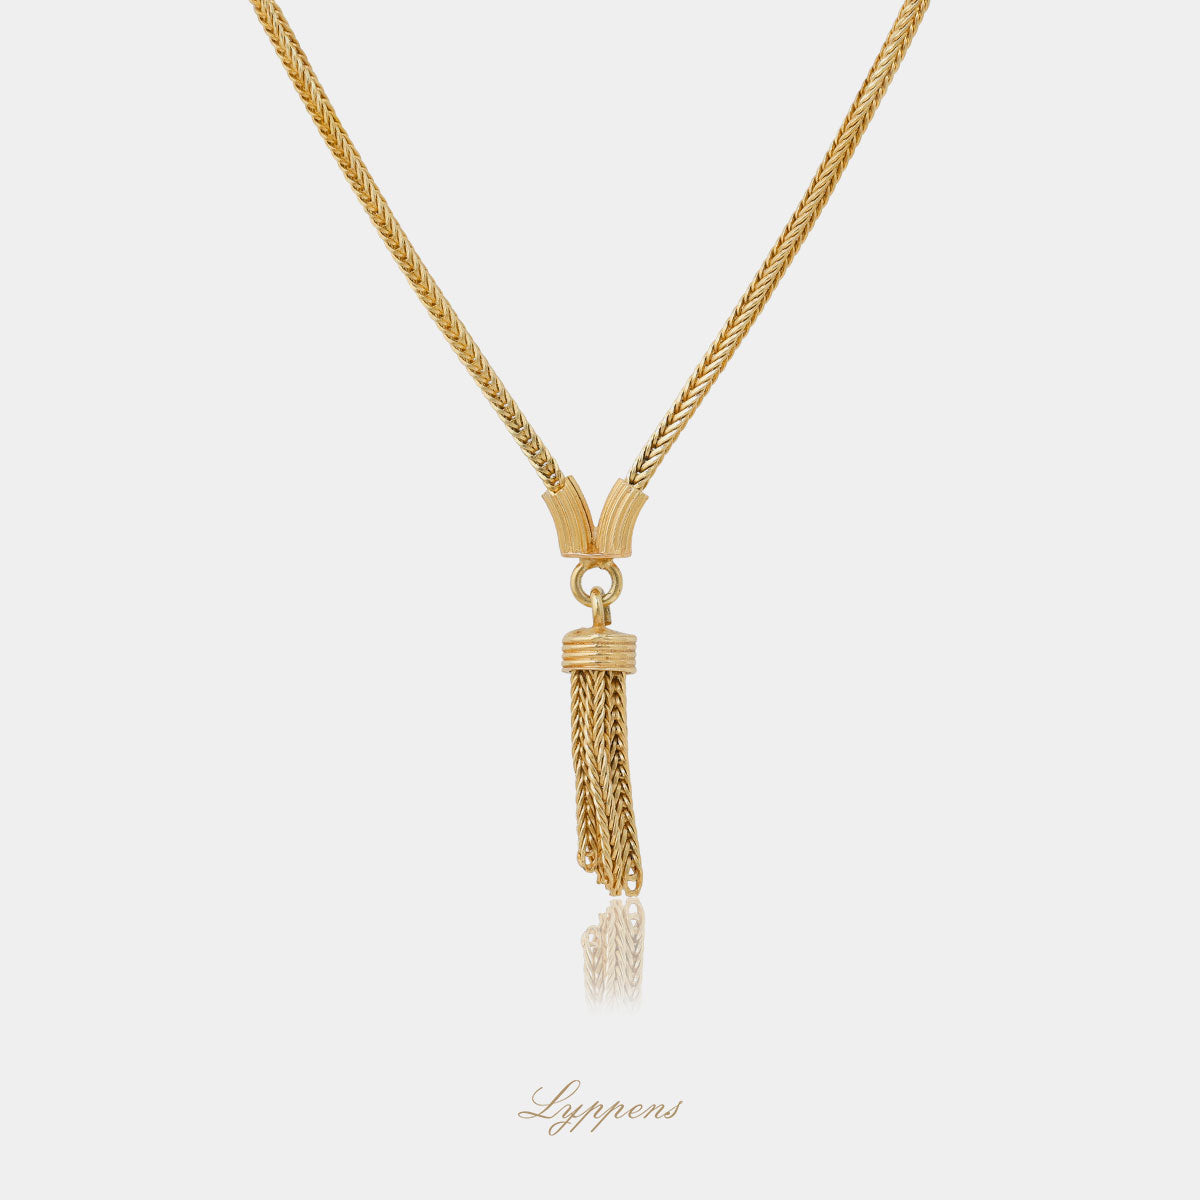 Yellow gold vintage necklace